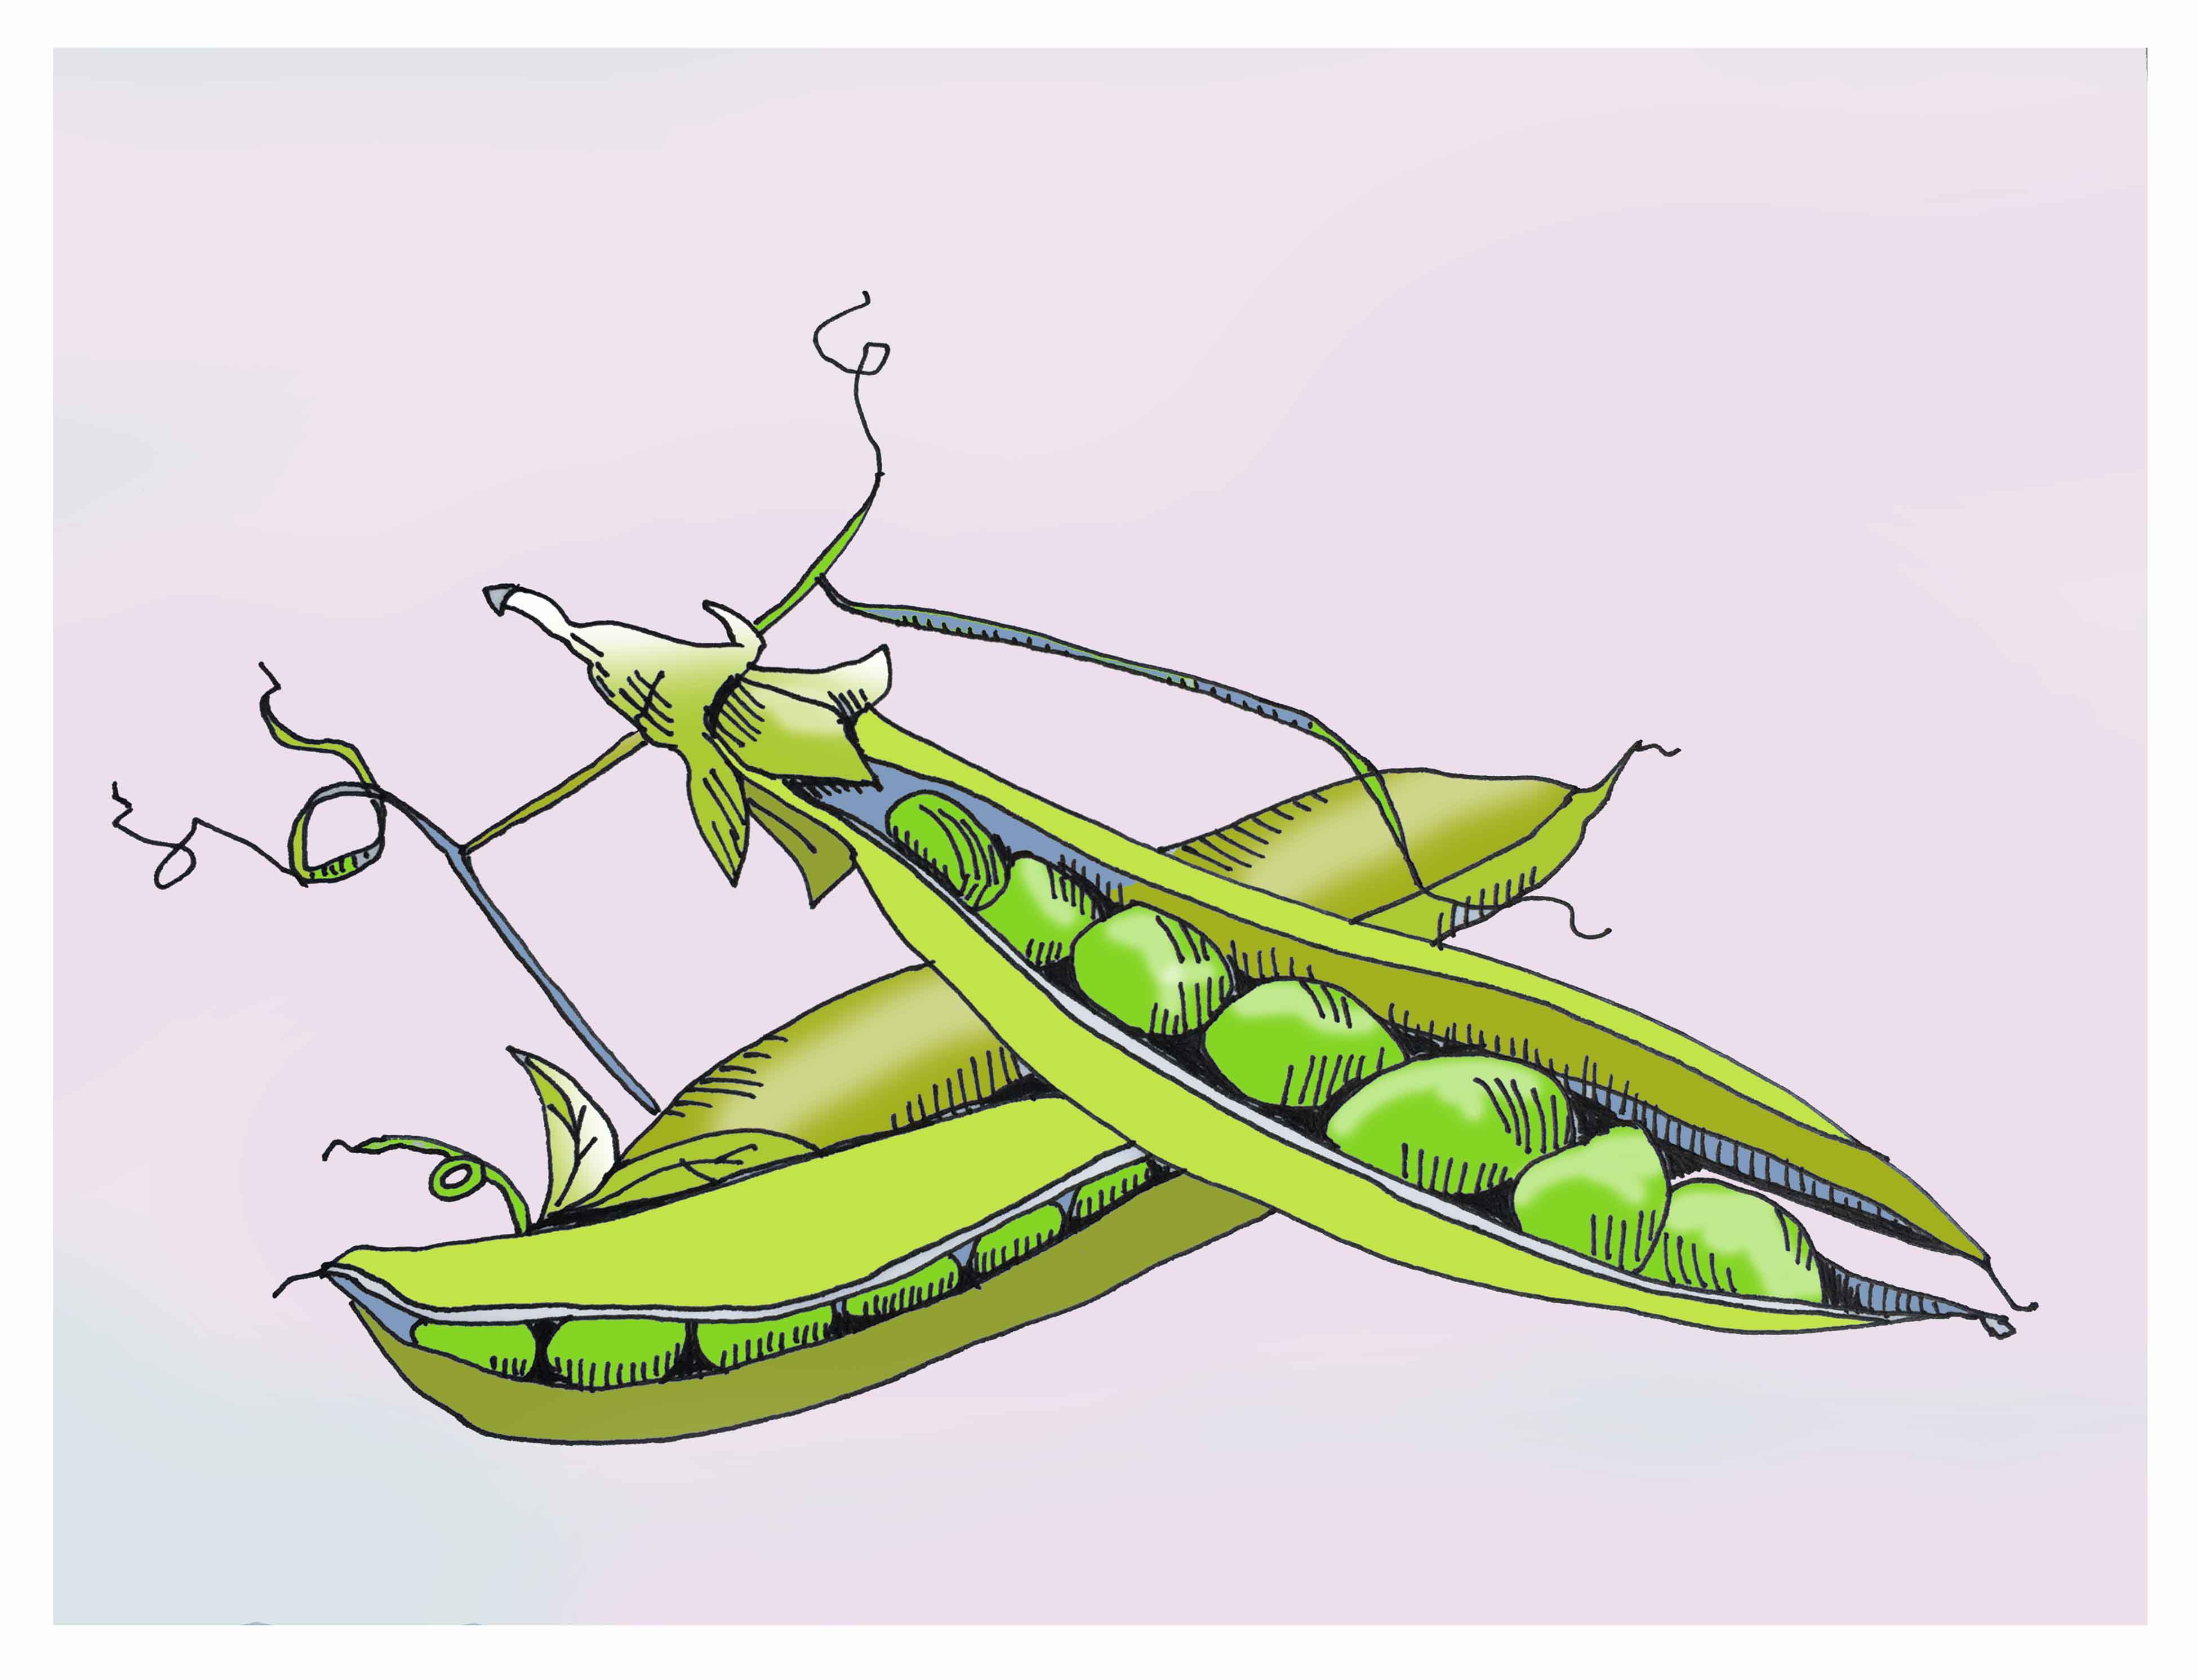 art every day number 133 / illustration / drawing / peas